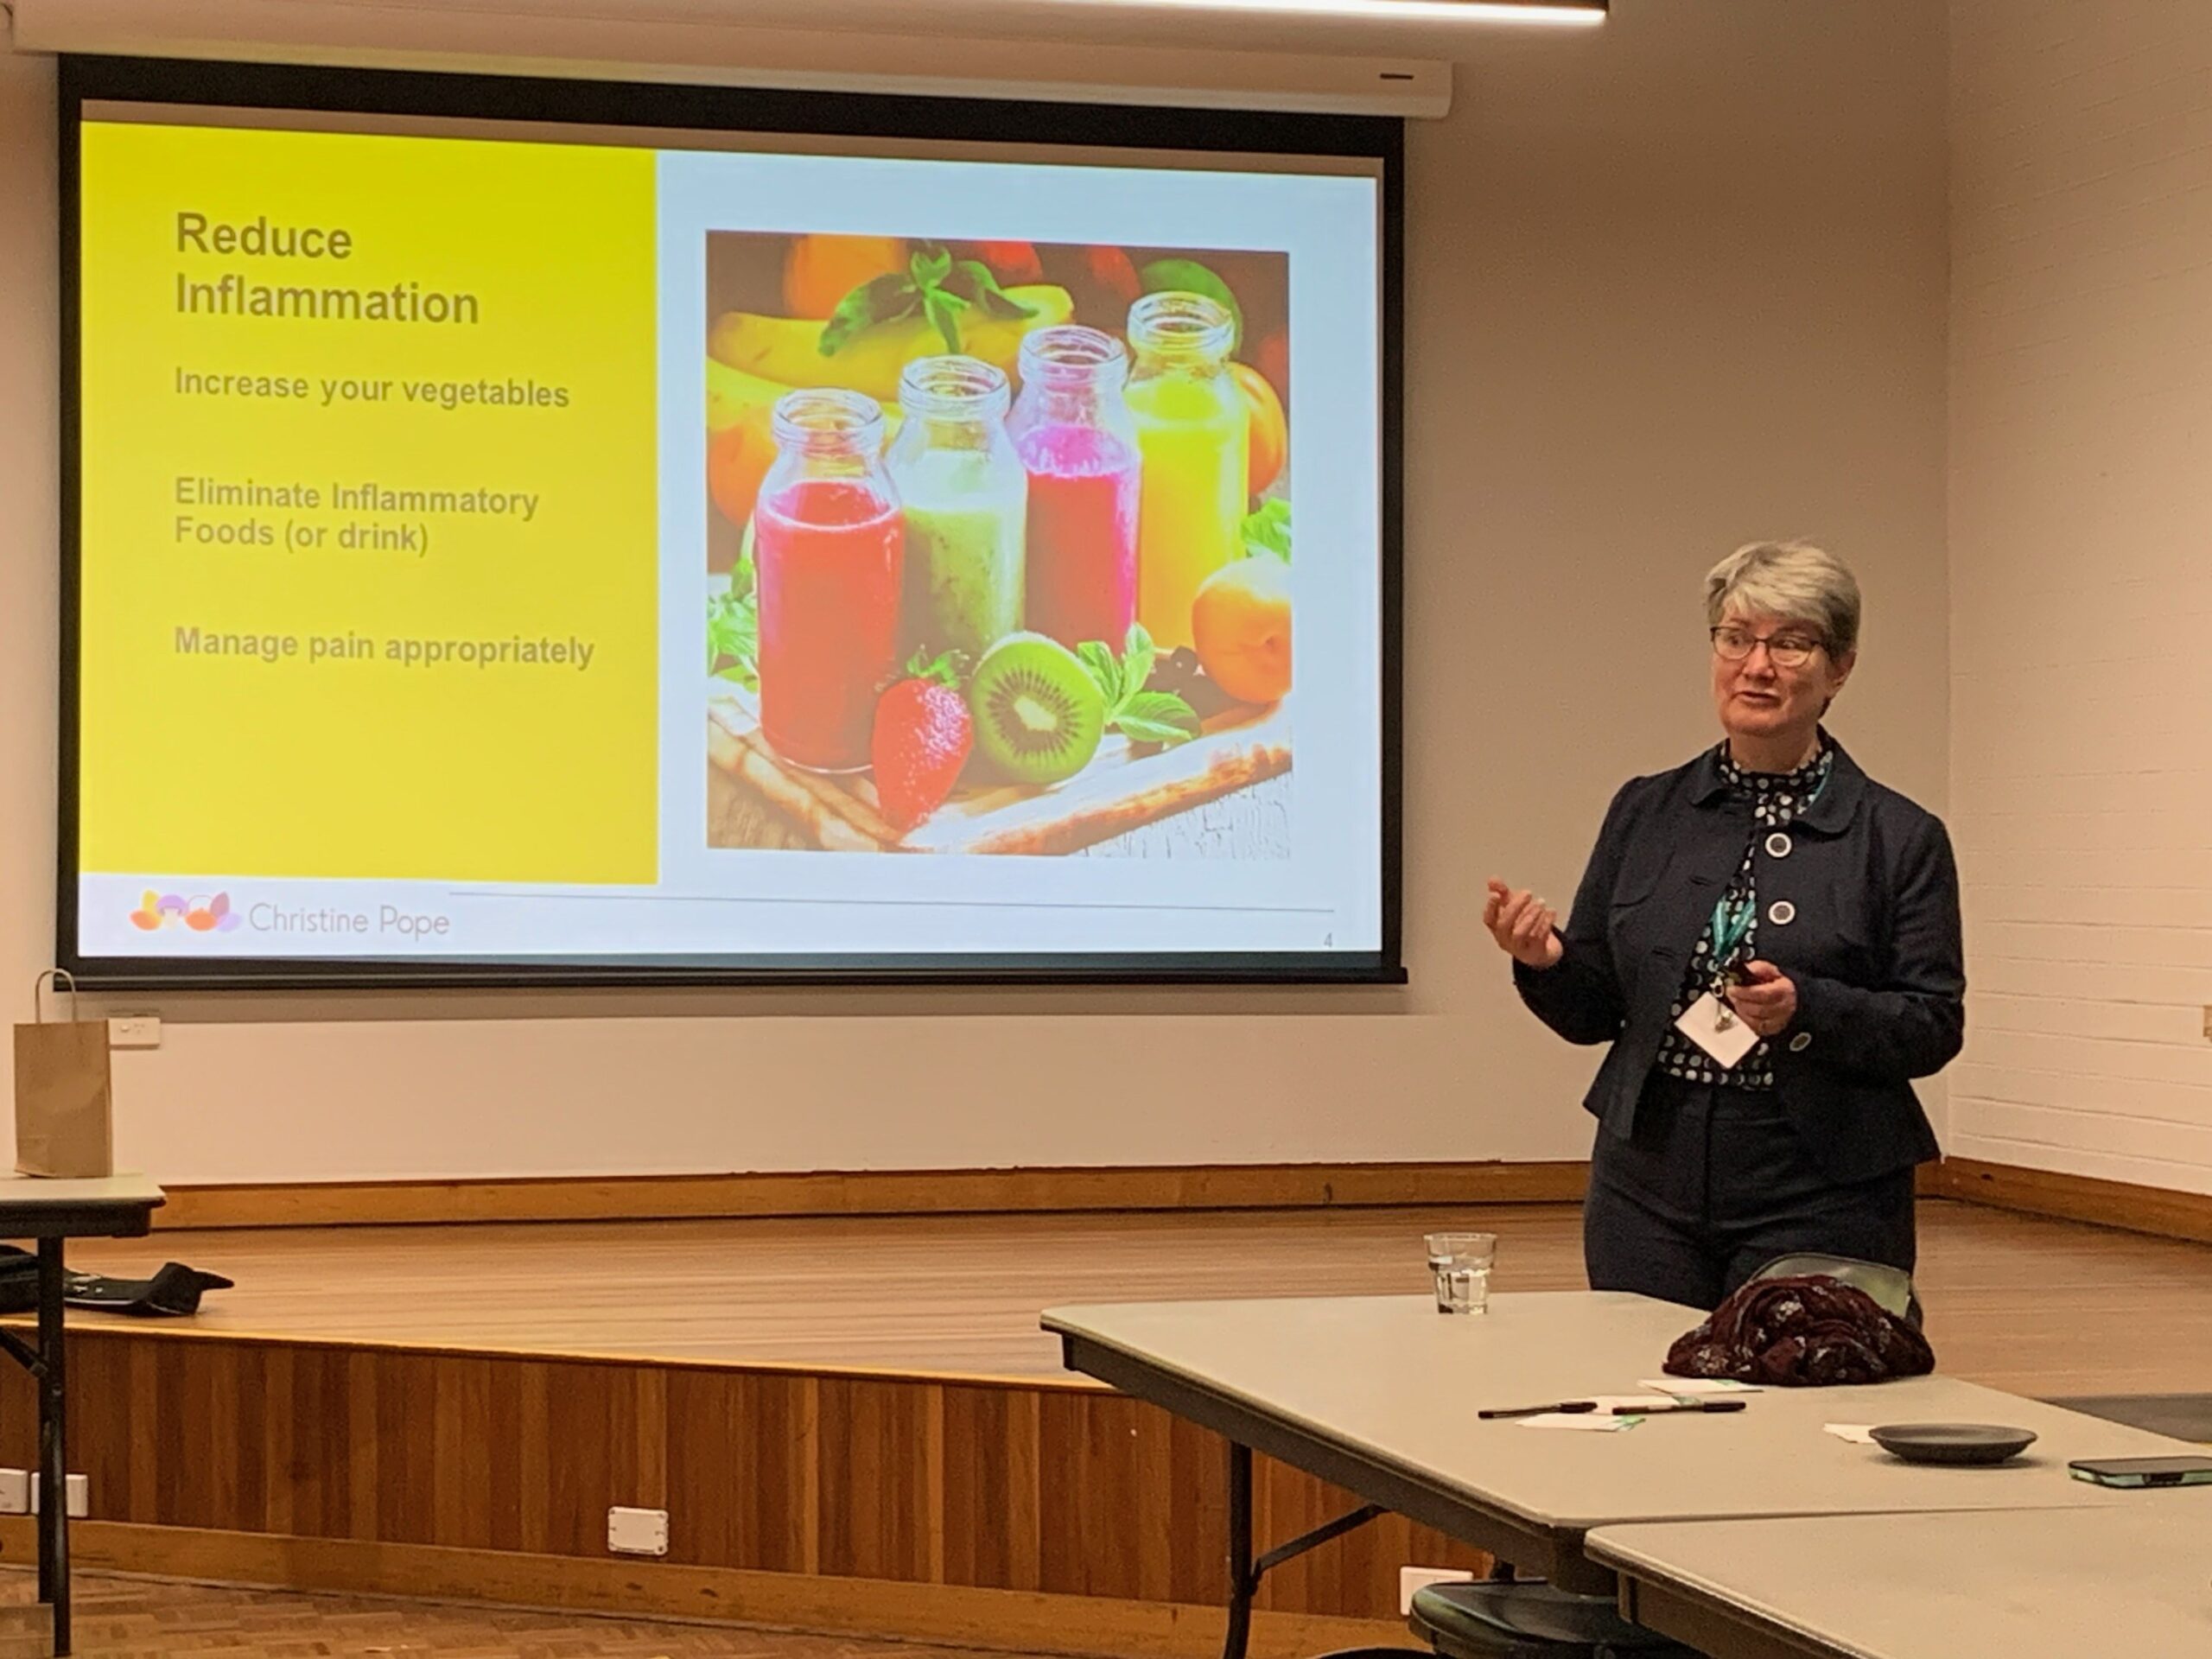 A woman in business stands next to a projector screen during a presentation. The screen displays a slide titled "Reduce Inflammation," featuring colorful smoothie bottles, fruits, and text about increasing vegetables, eliminating inflammatory foods, and managing pain appropriately.